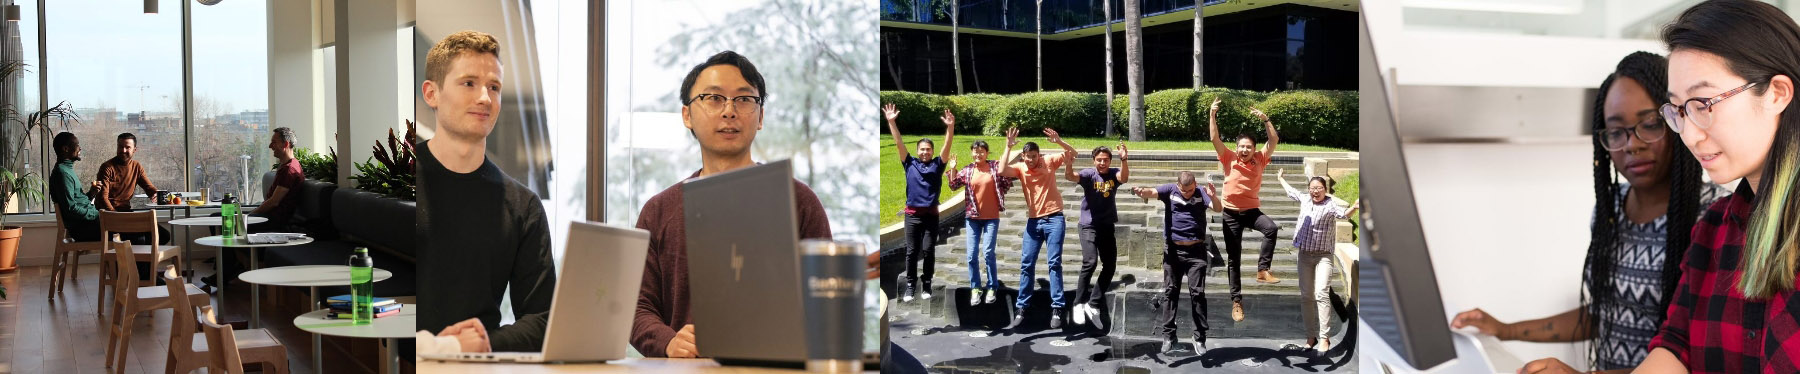 Collage of graduate students in corporate setting